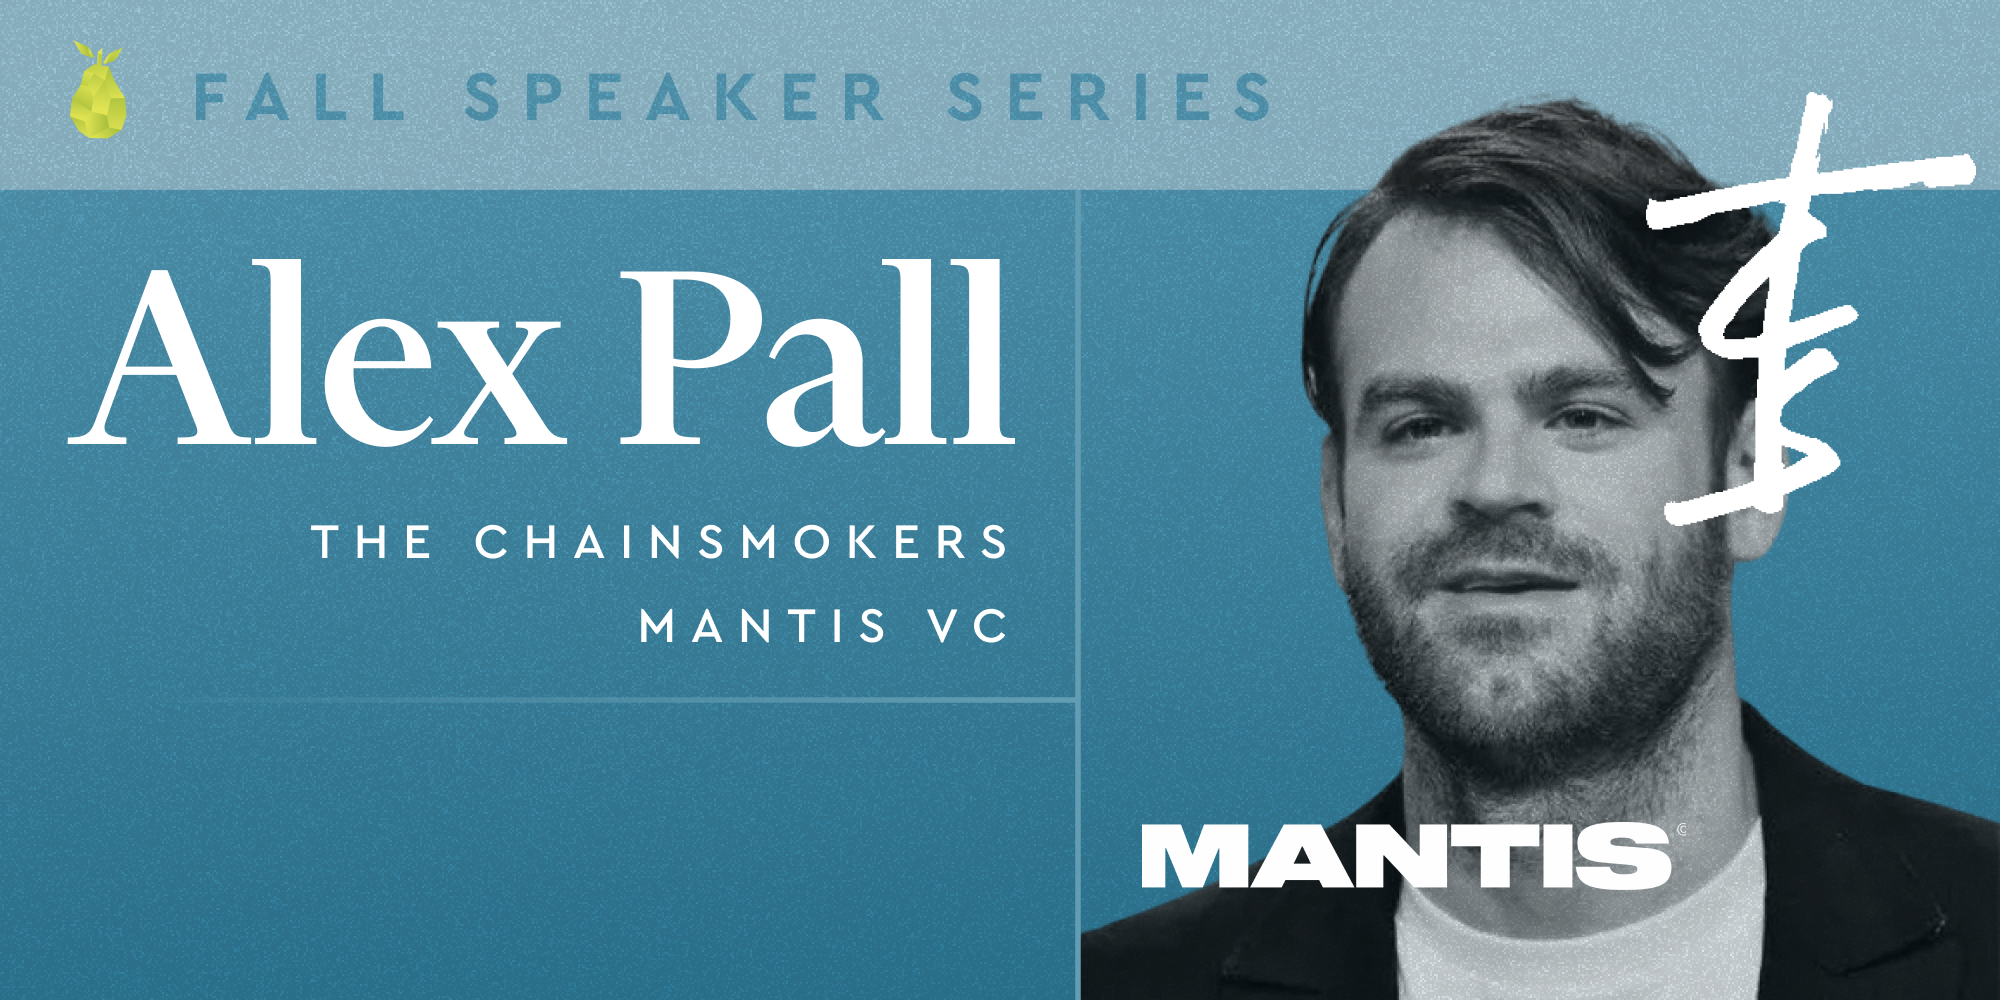 event Pear Speaker Series: Fireside Chat with Alex Pall of the Chainsmokers and Mantis VC